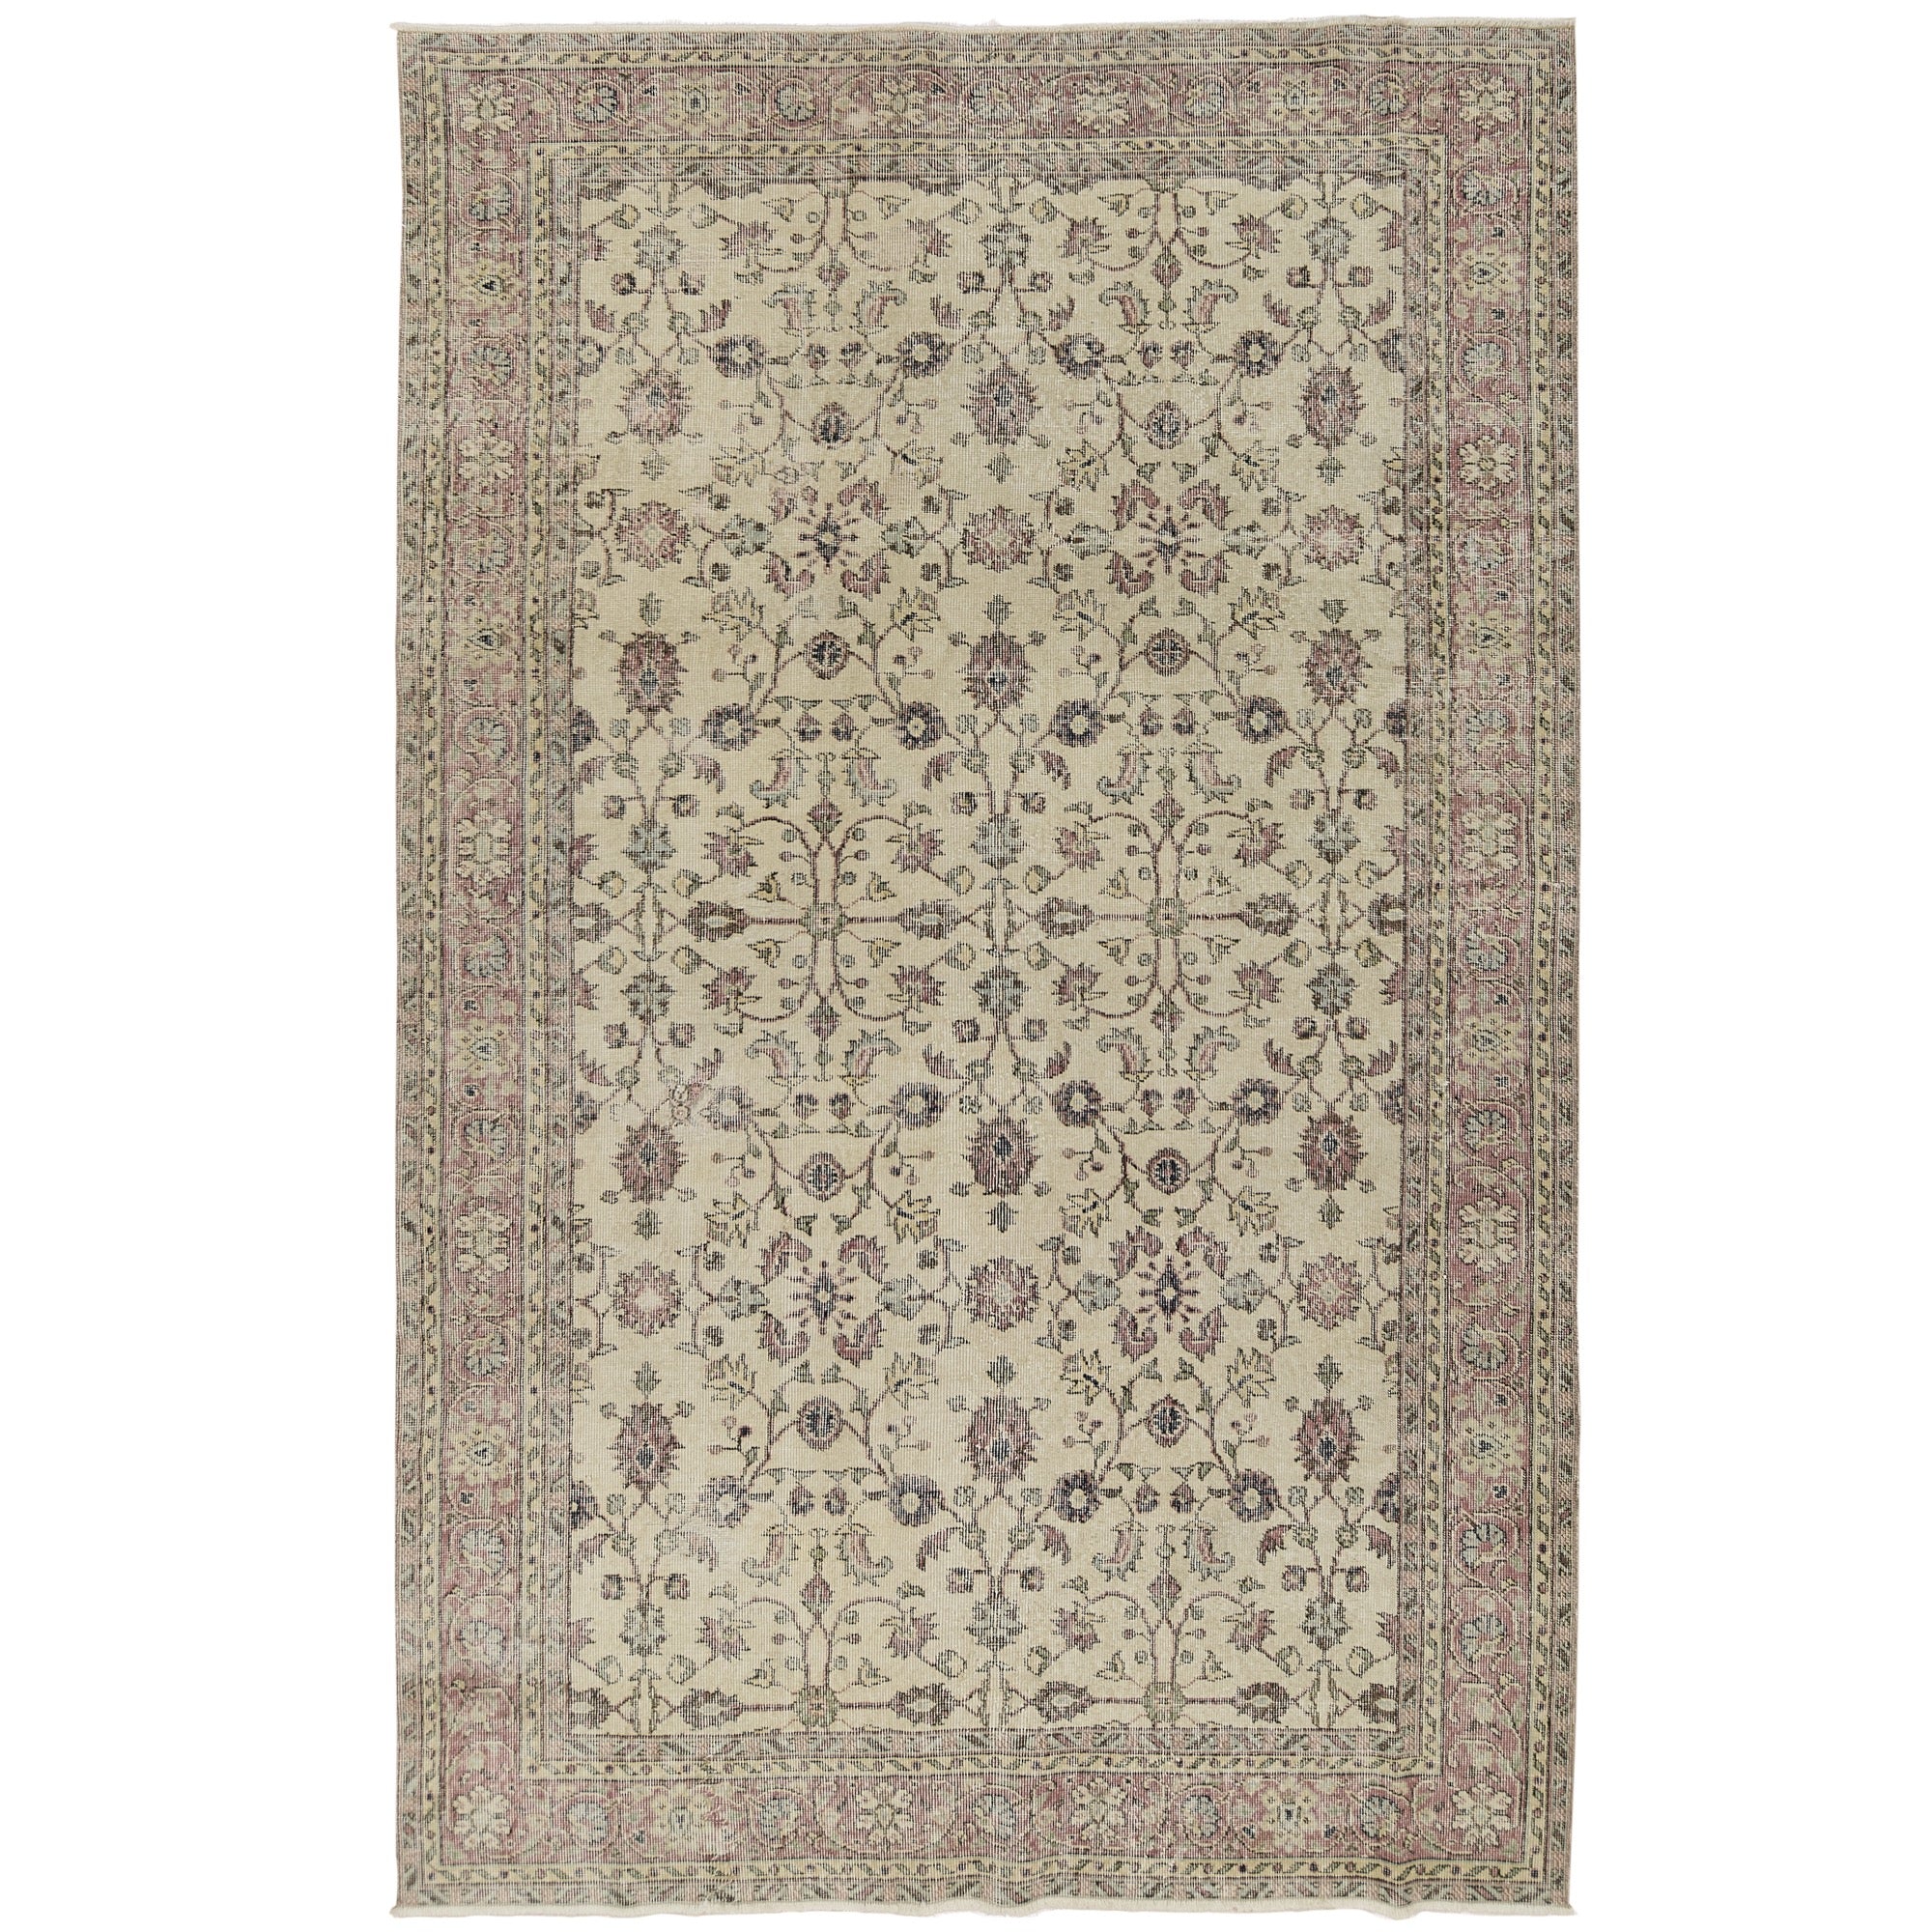 Yomaris | Beige Elegance in a Hand-Knotted Carpet | Kuden Rugs